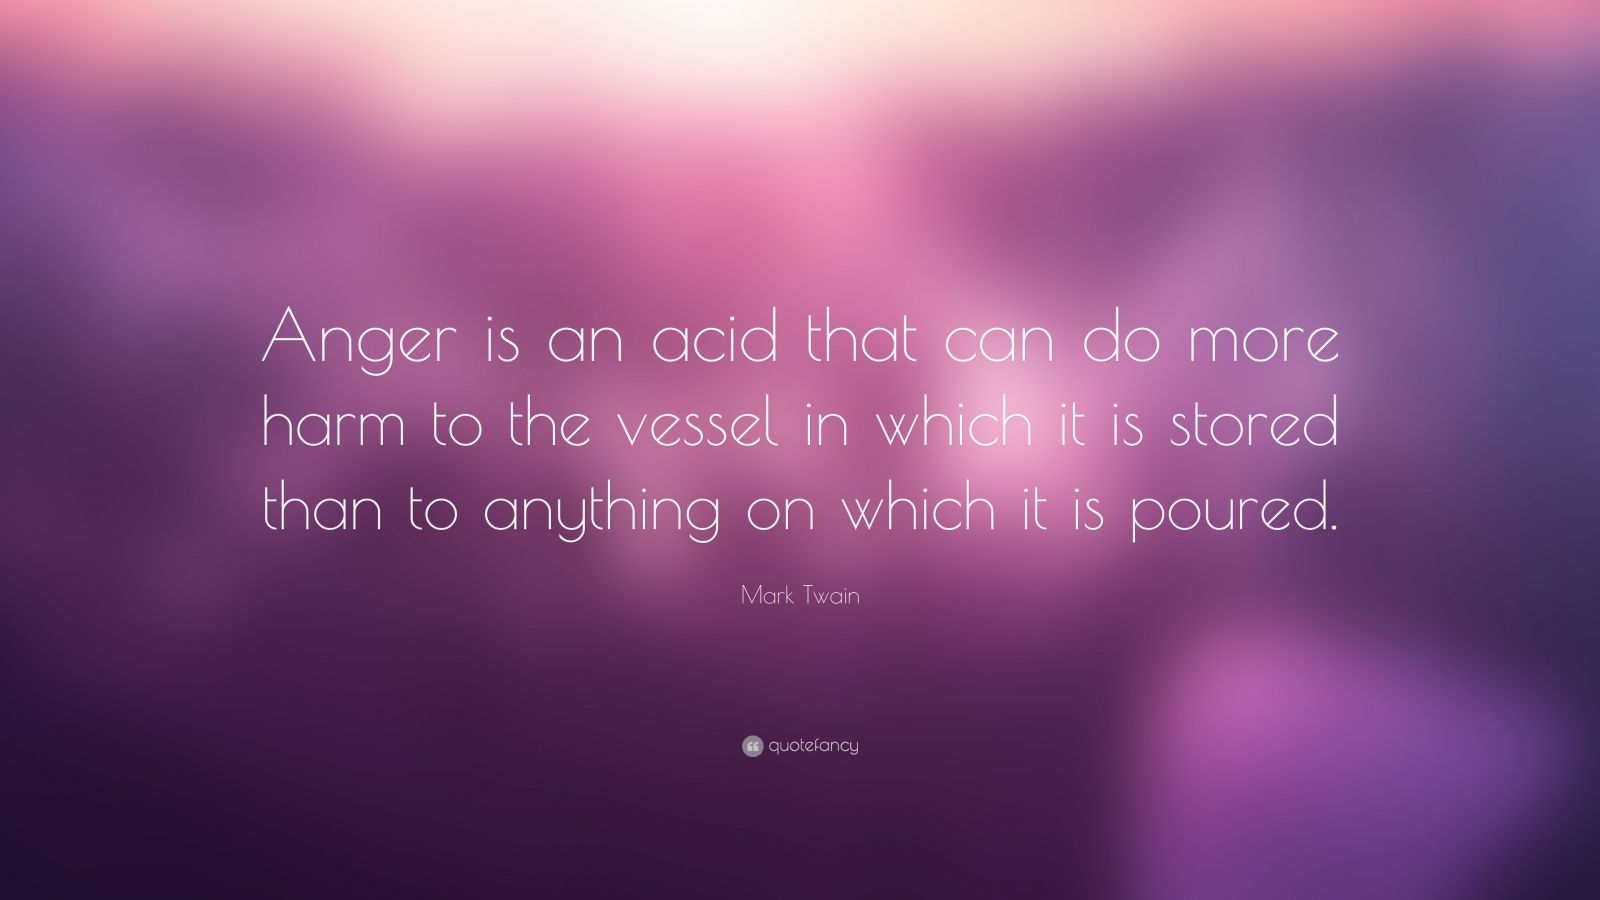 Mark Twain Quote: "Anger is an acid that can do more harm ...